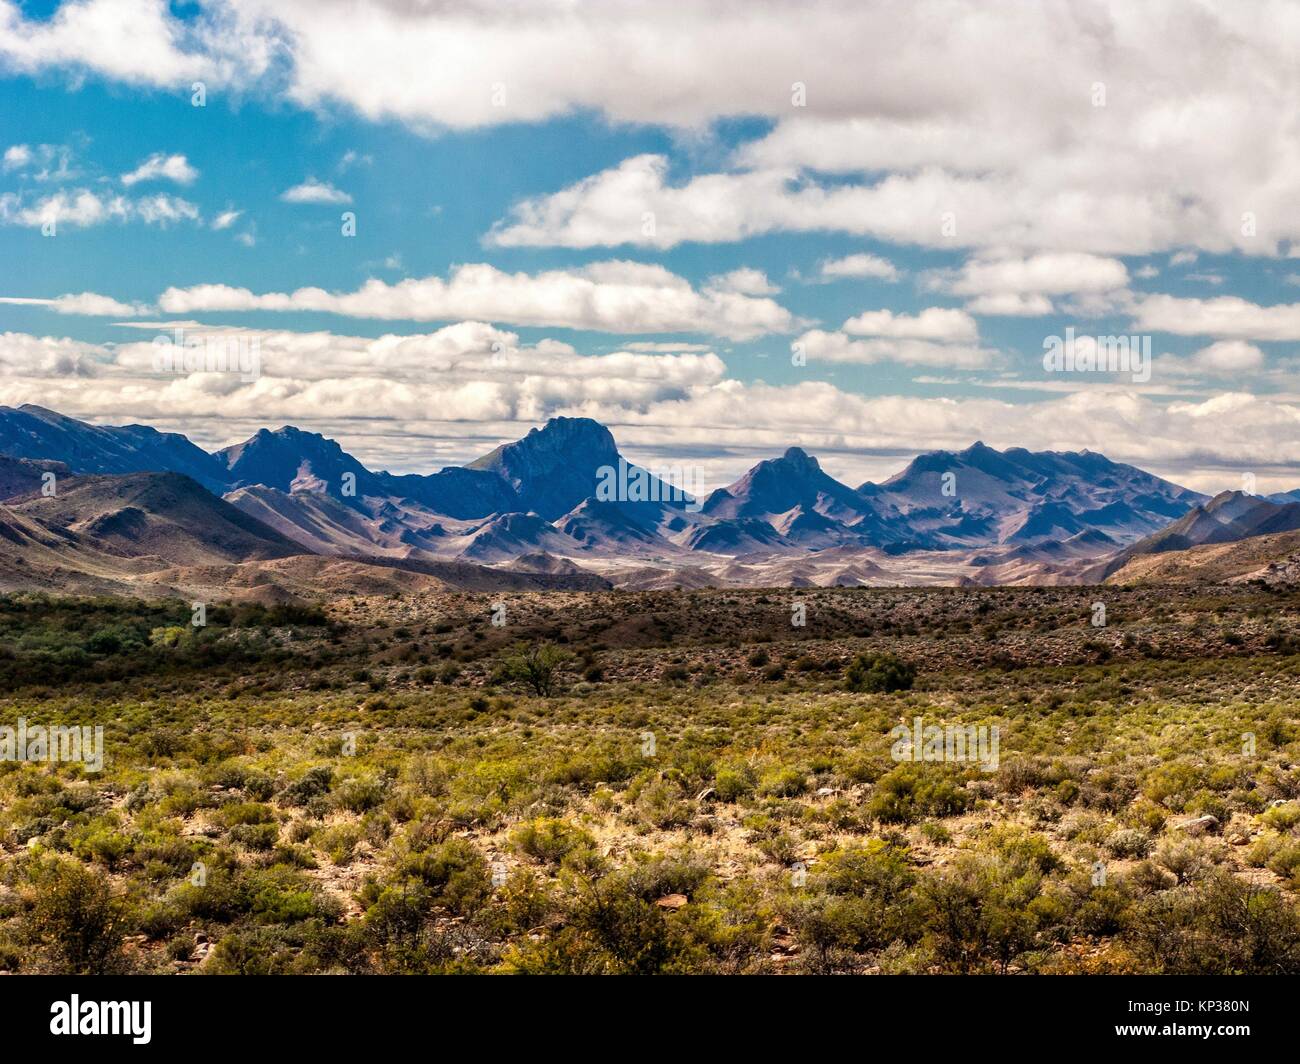 Karoo landscape with distant rugged mountain range. Stock Photo